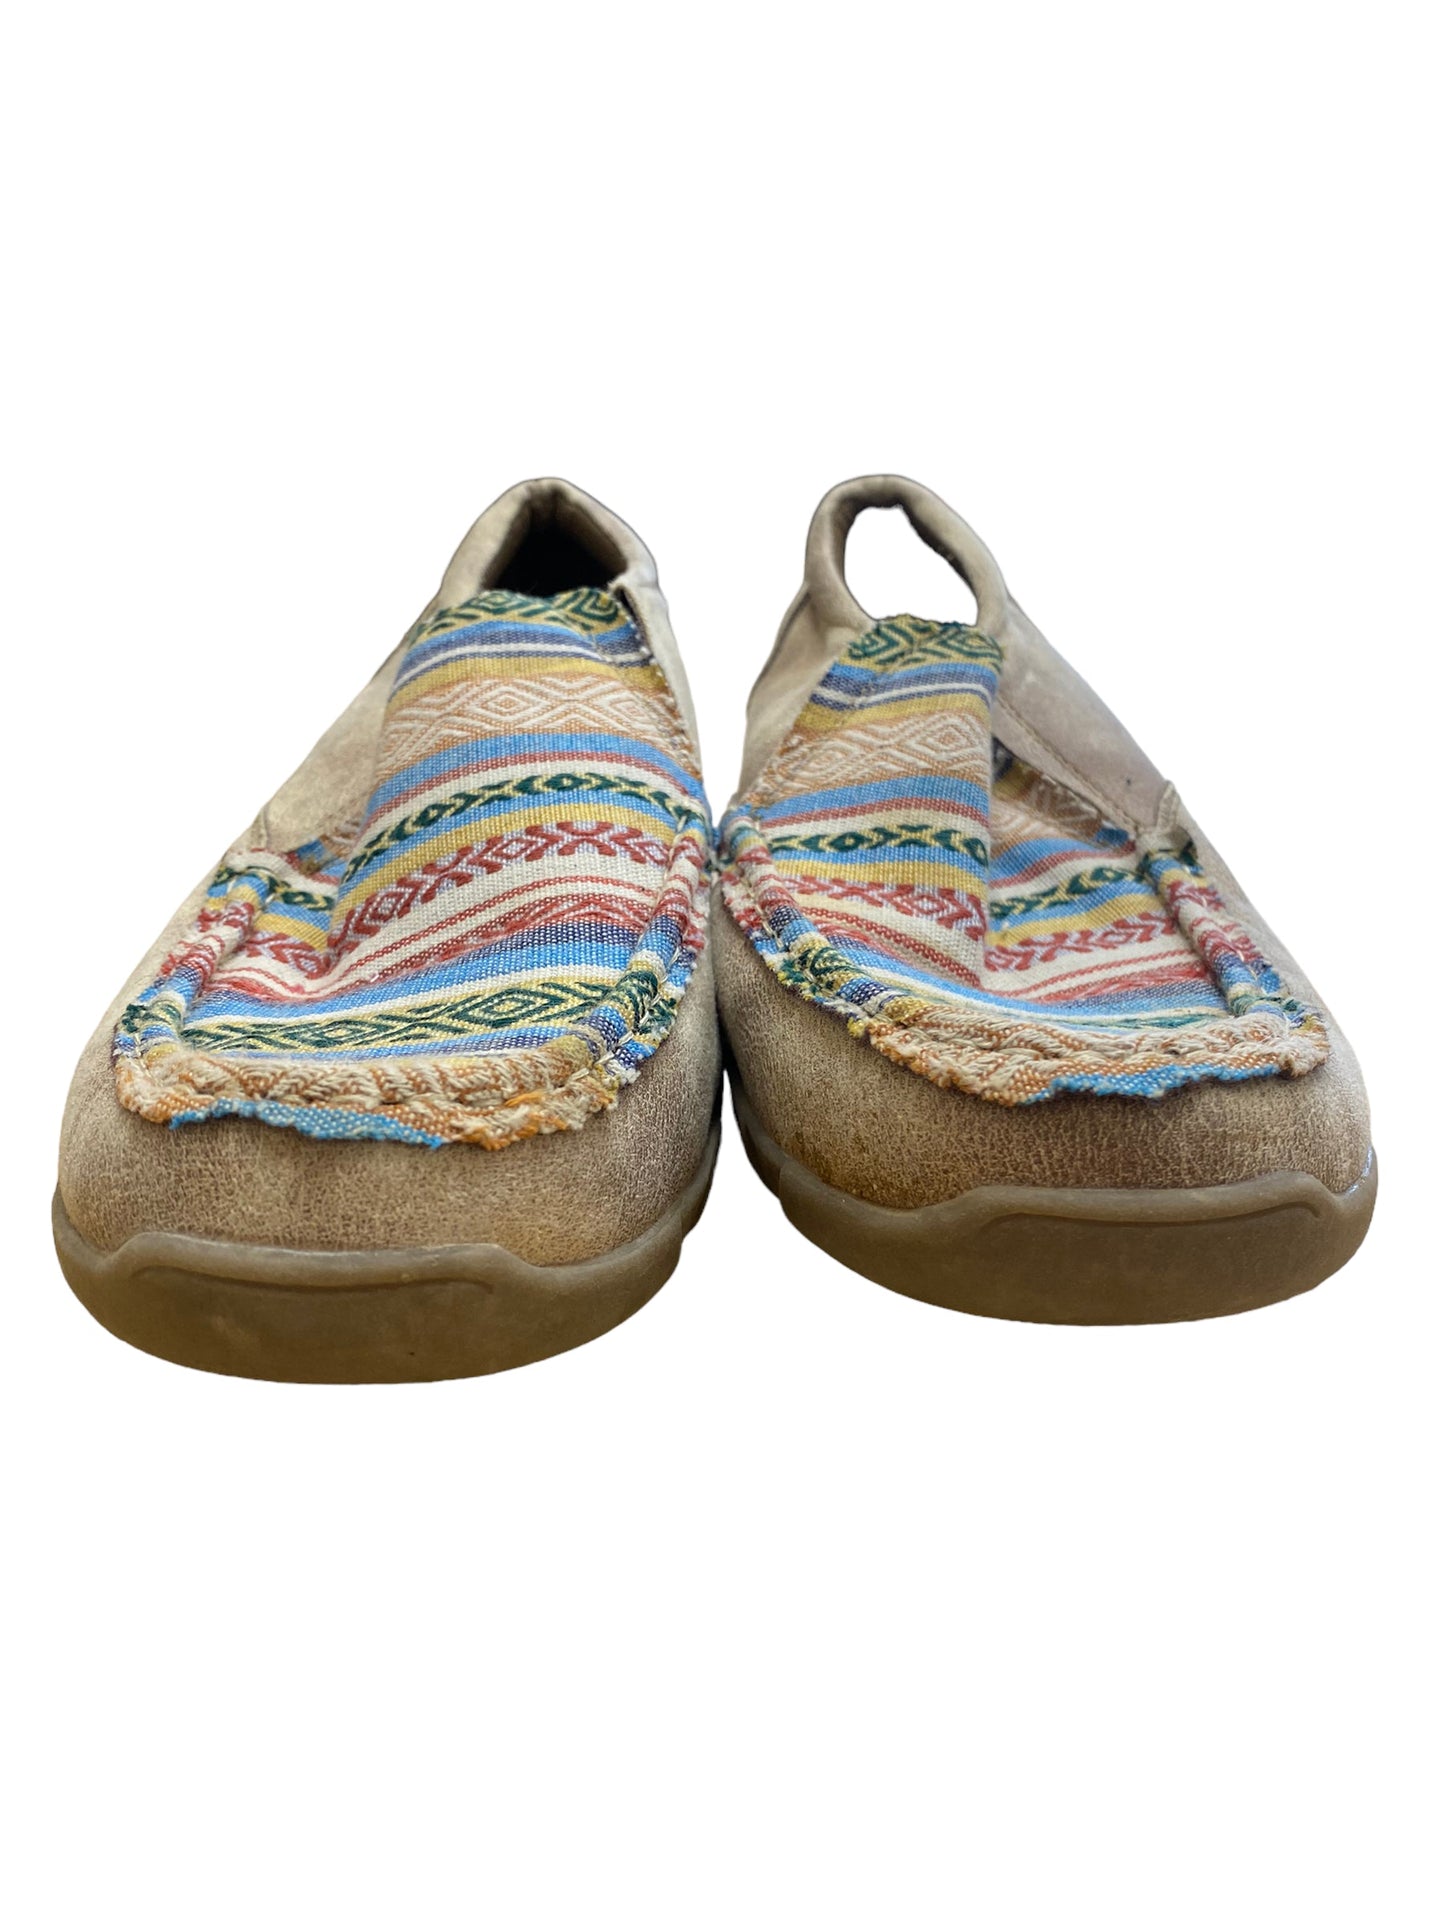 Shoes Flats Moccasin By Roper  Size: 10.5